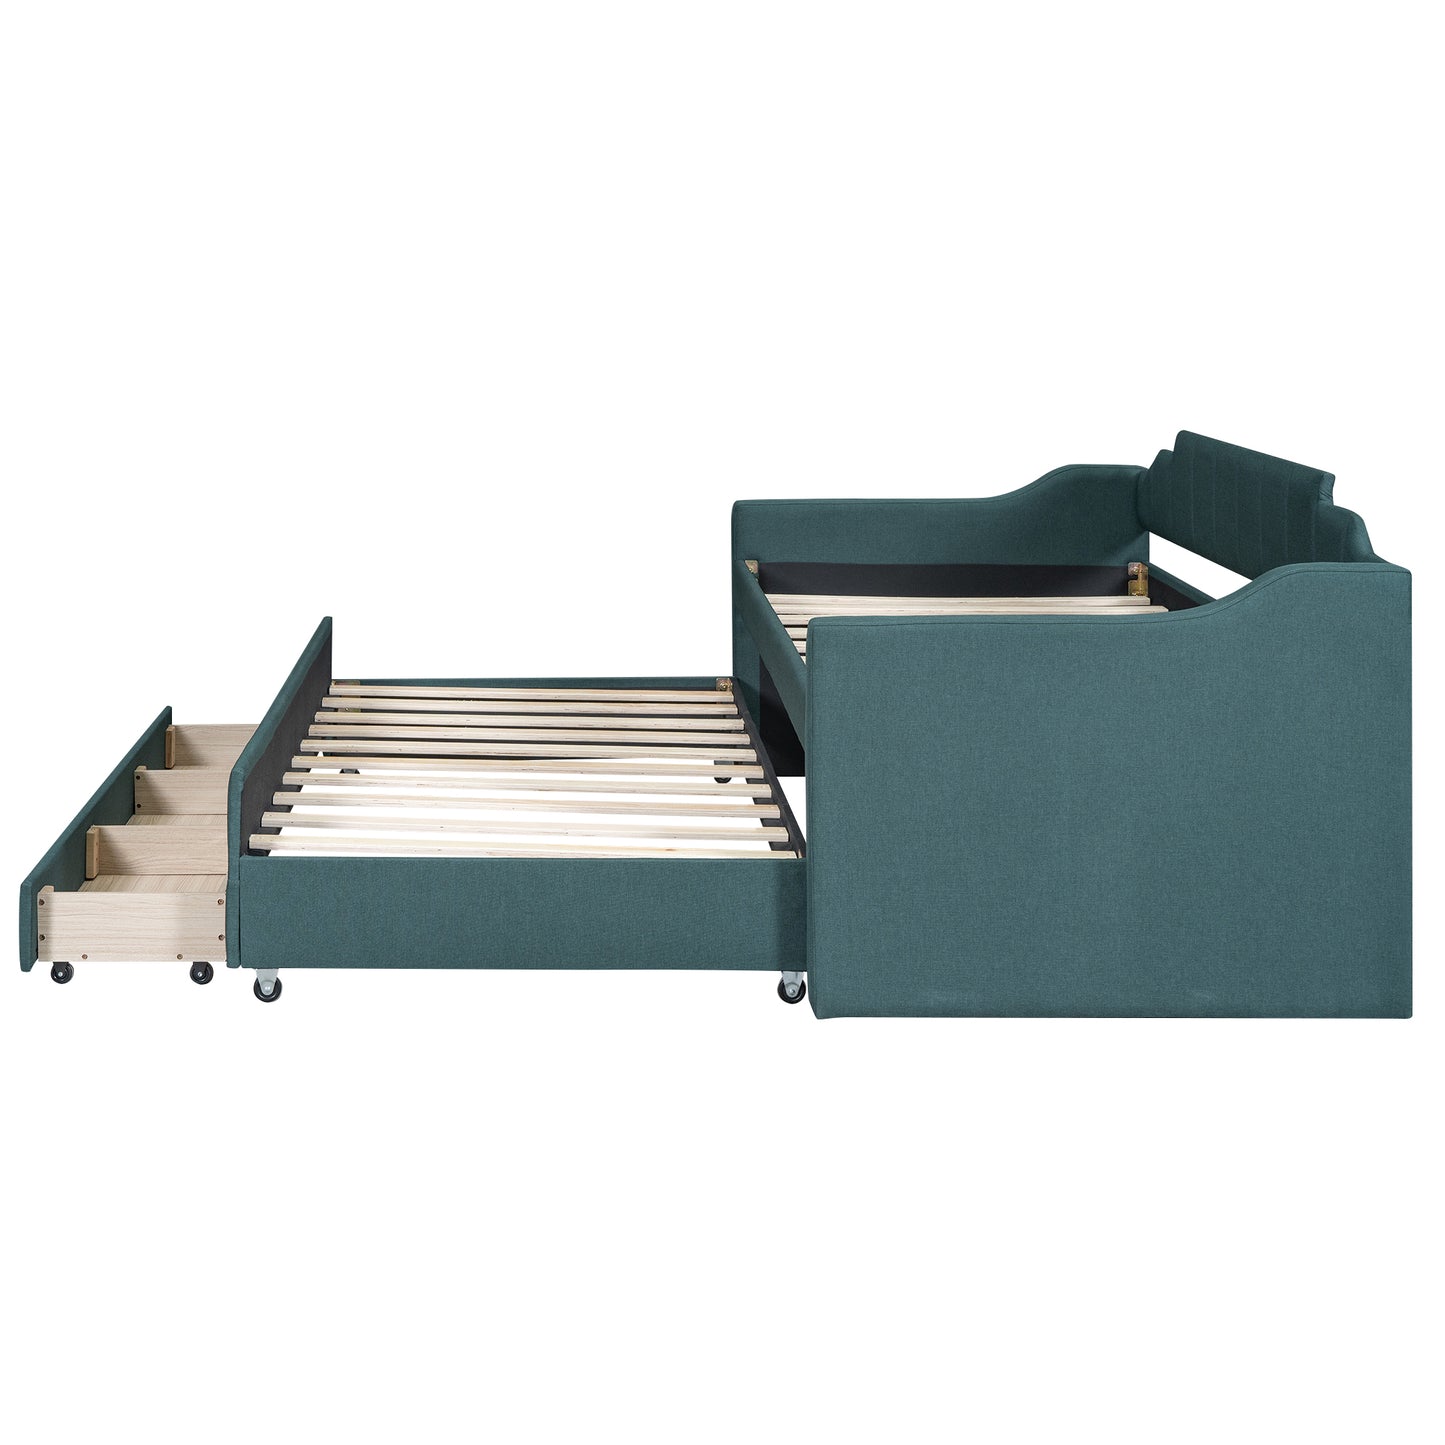 Twin Size Upholstered Daybed with Trundle and Three Drawers,Green